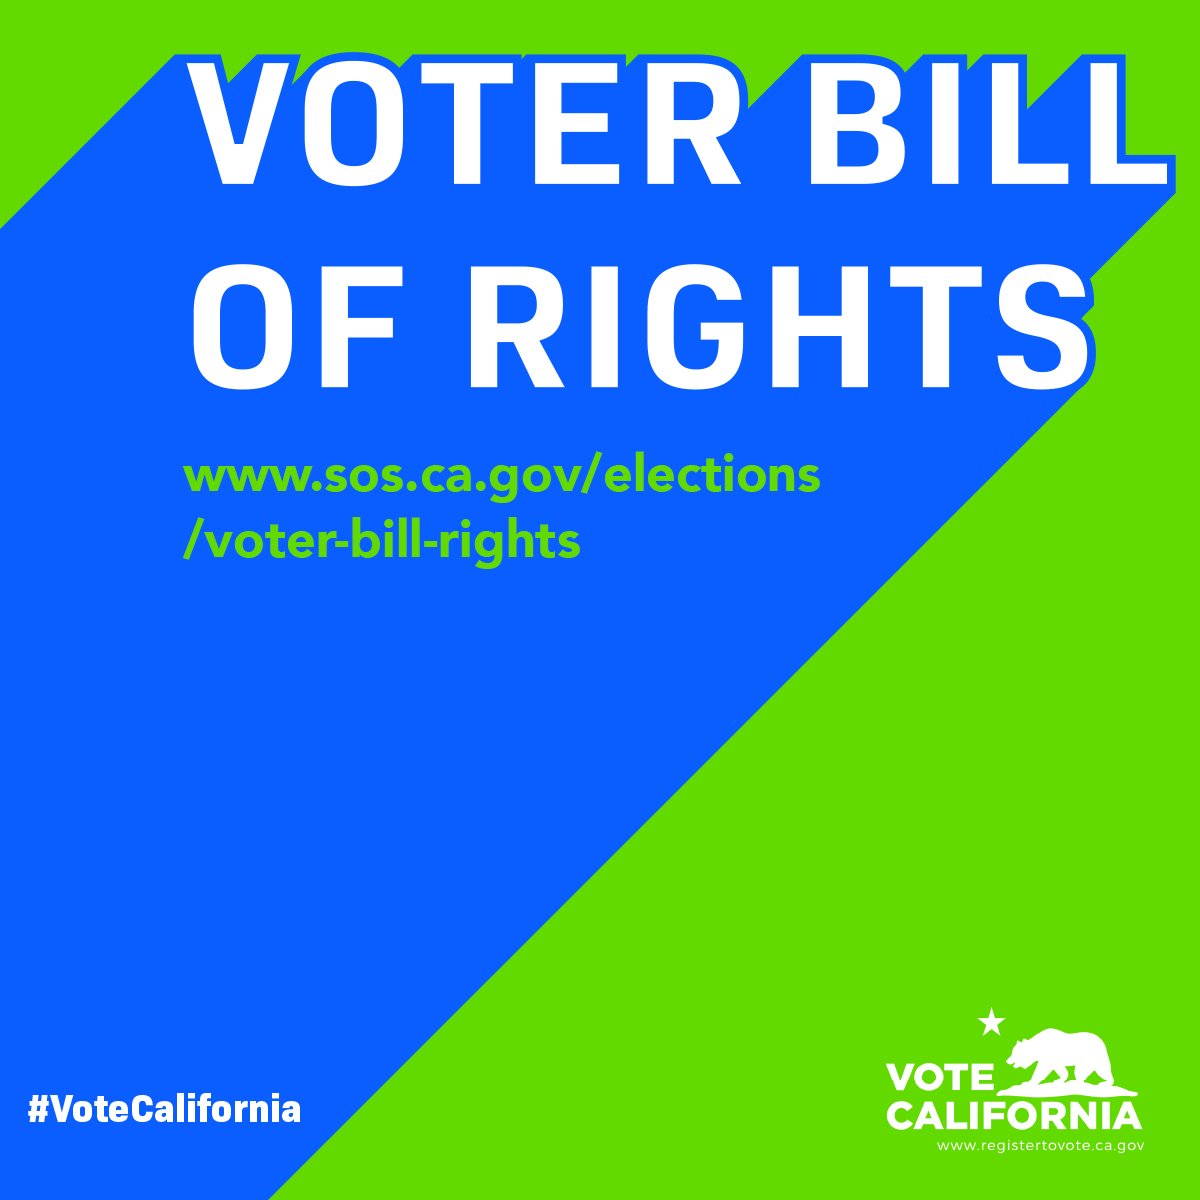 If you’re in line by 8:00 pm when the polls close, STAY IN LINE. Poll workers are required to stay until everyone that is in line at 8:00 pm has the chance to cast their ballot! Check out the Voter Bill of Rights for more info: sos.ca.gov/elections/vote… #VoteCalifornia #VoteSure